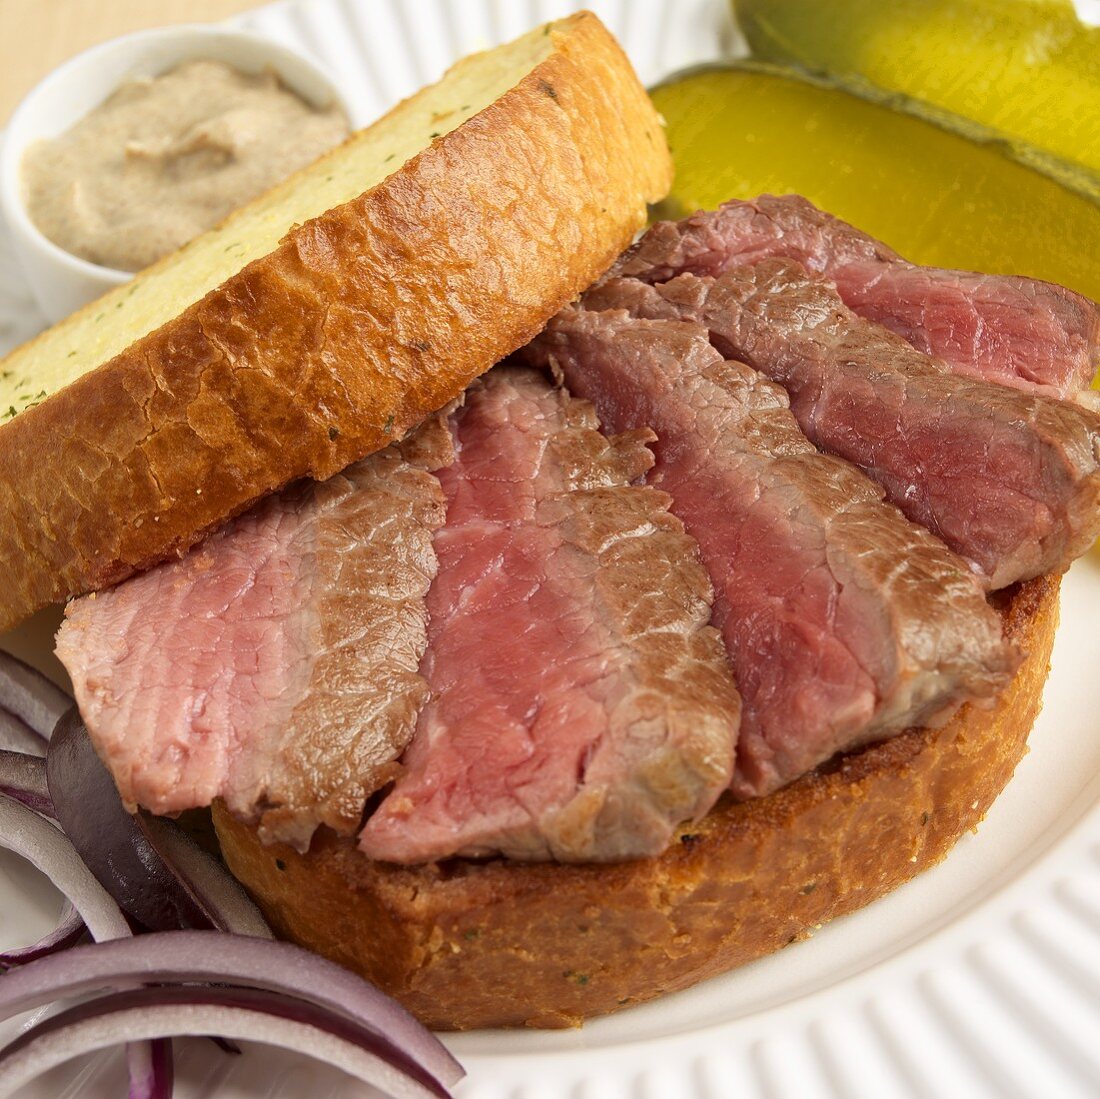 Sliced Rare Steak Sandwich on Texas Toast; Onions and Pickles